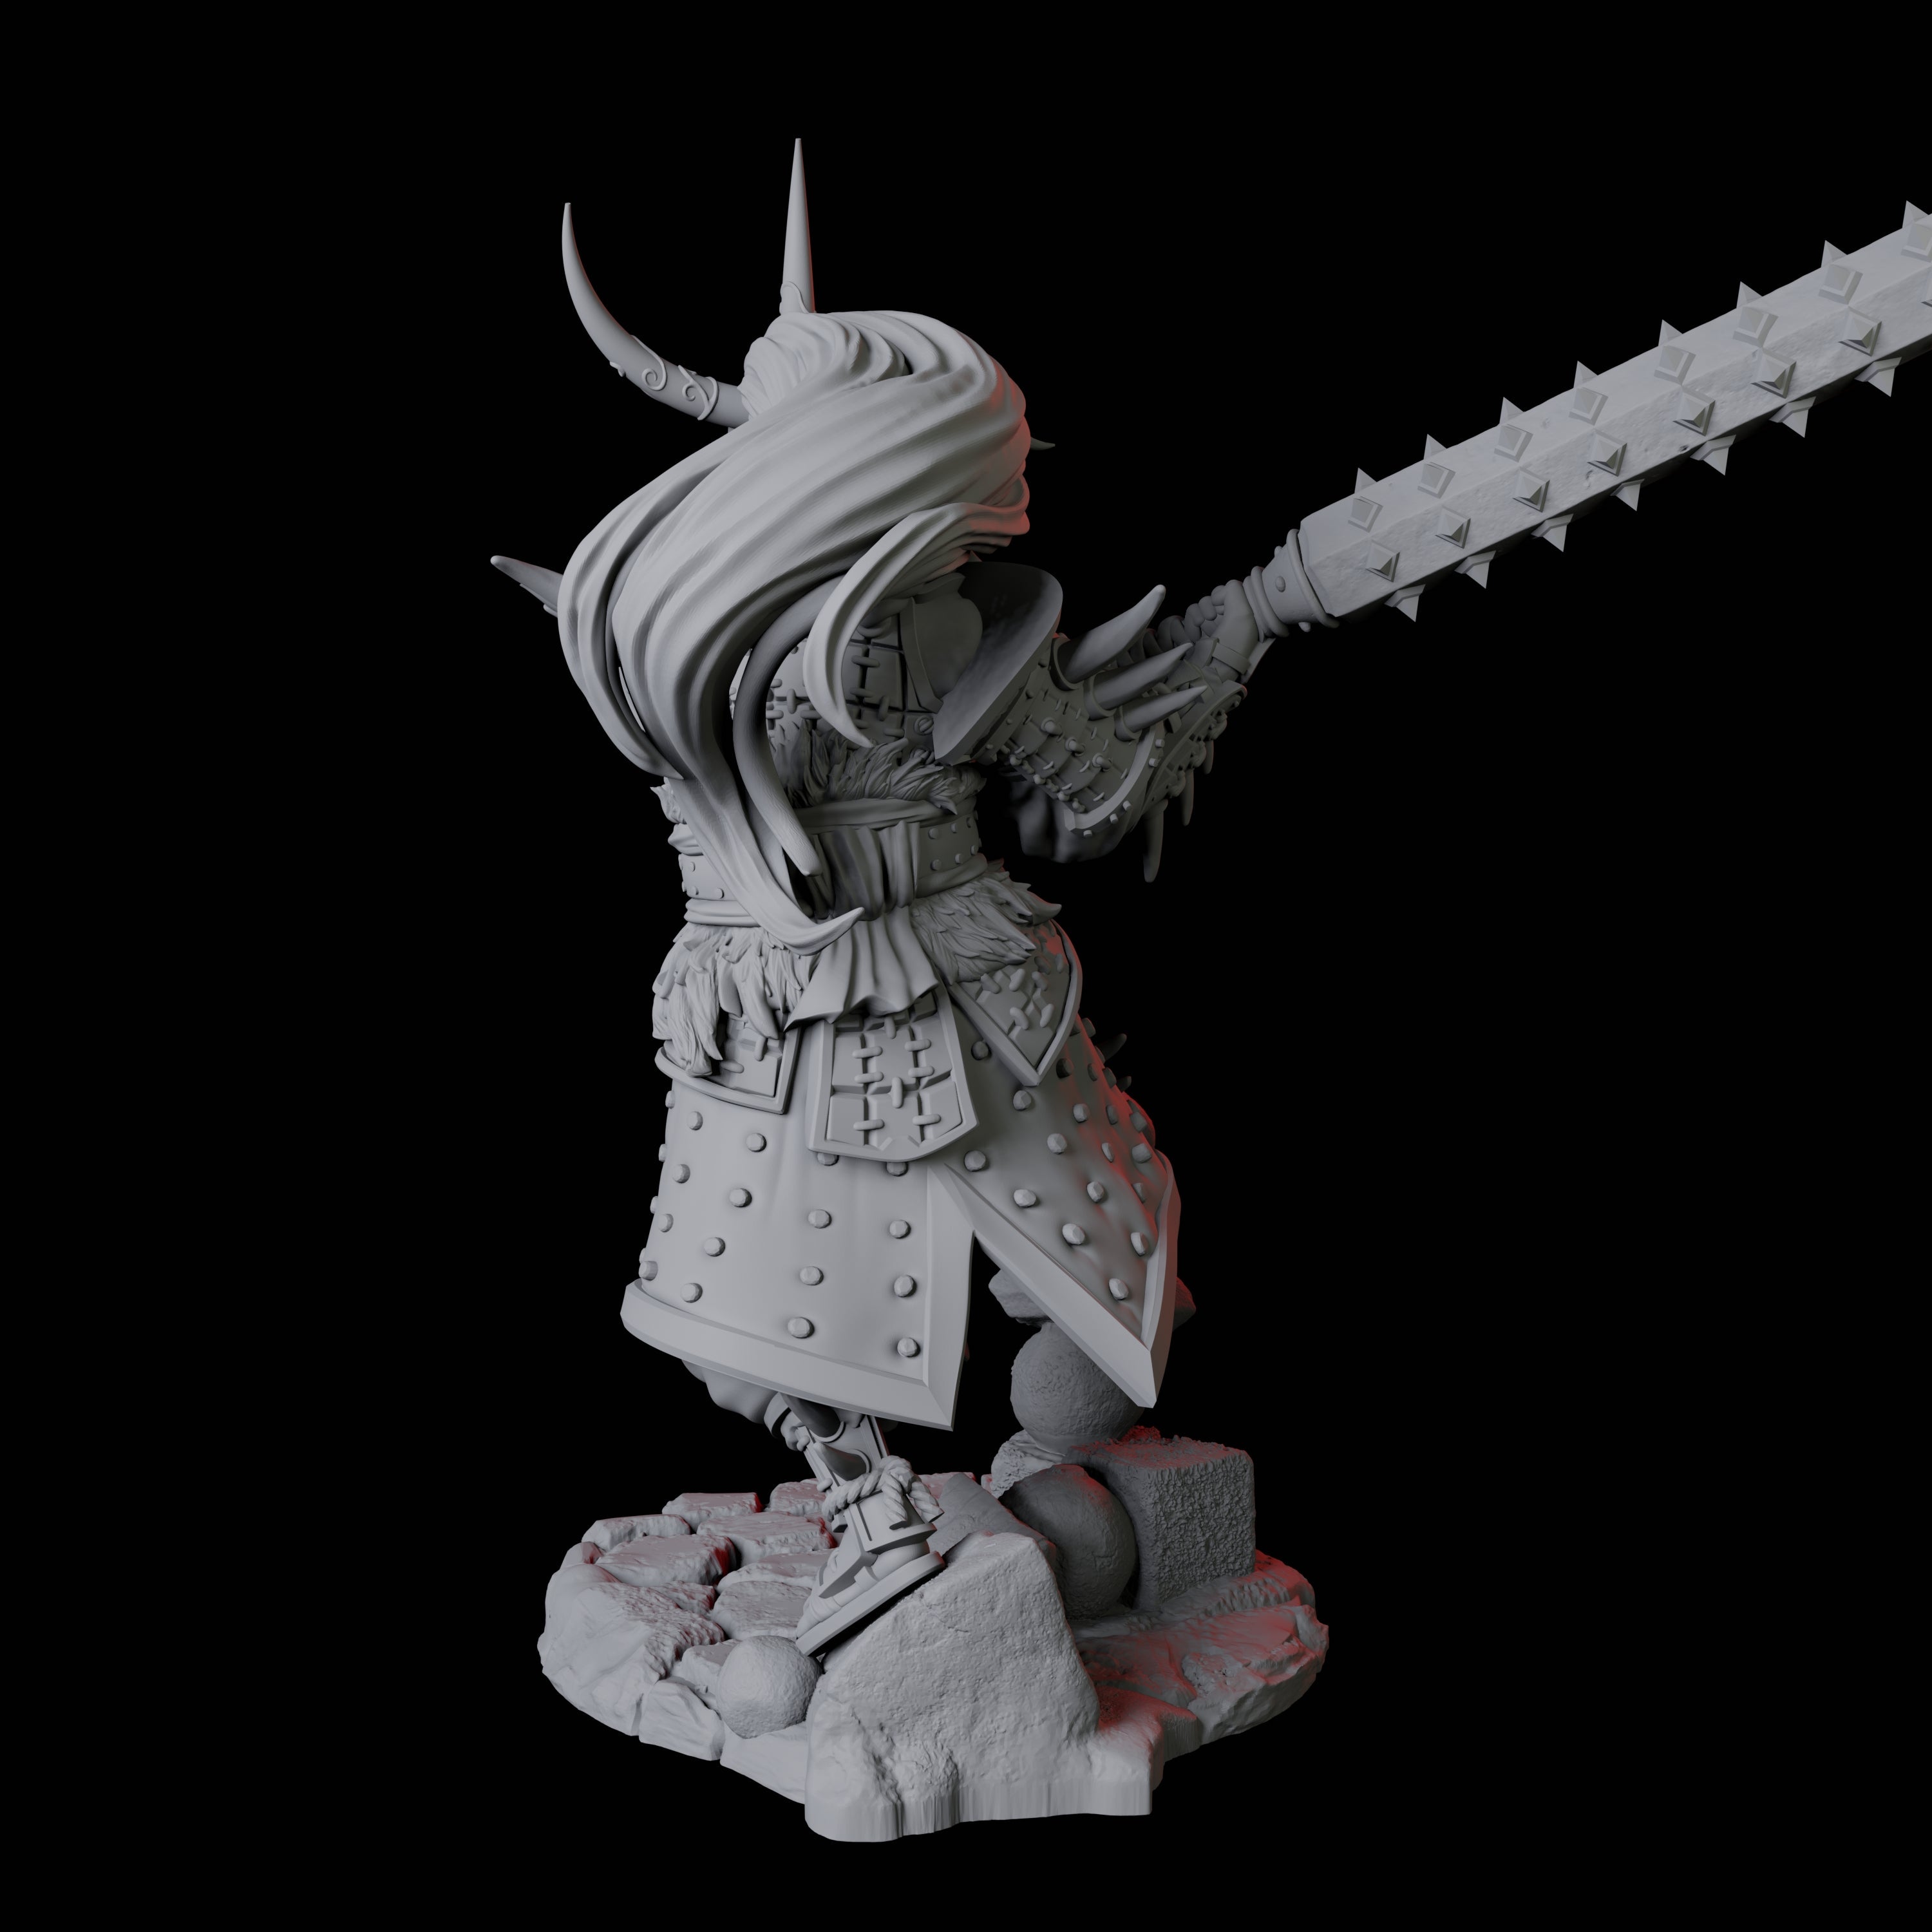 Oni Death Samurai C Miniature for Dungeons and Dragons, Pathfinder or other TTRPGs